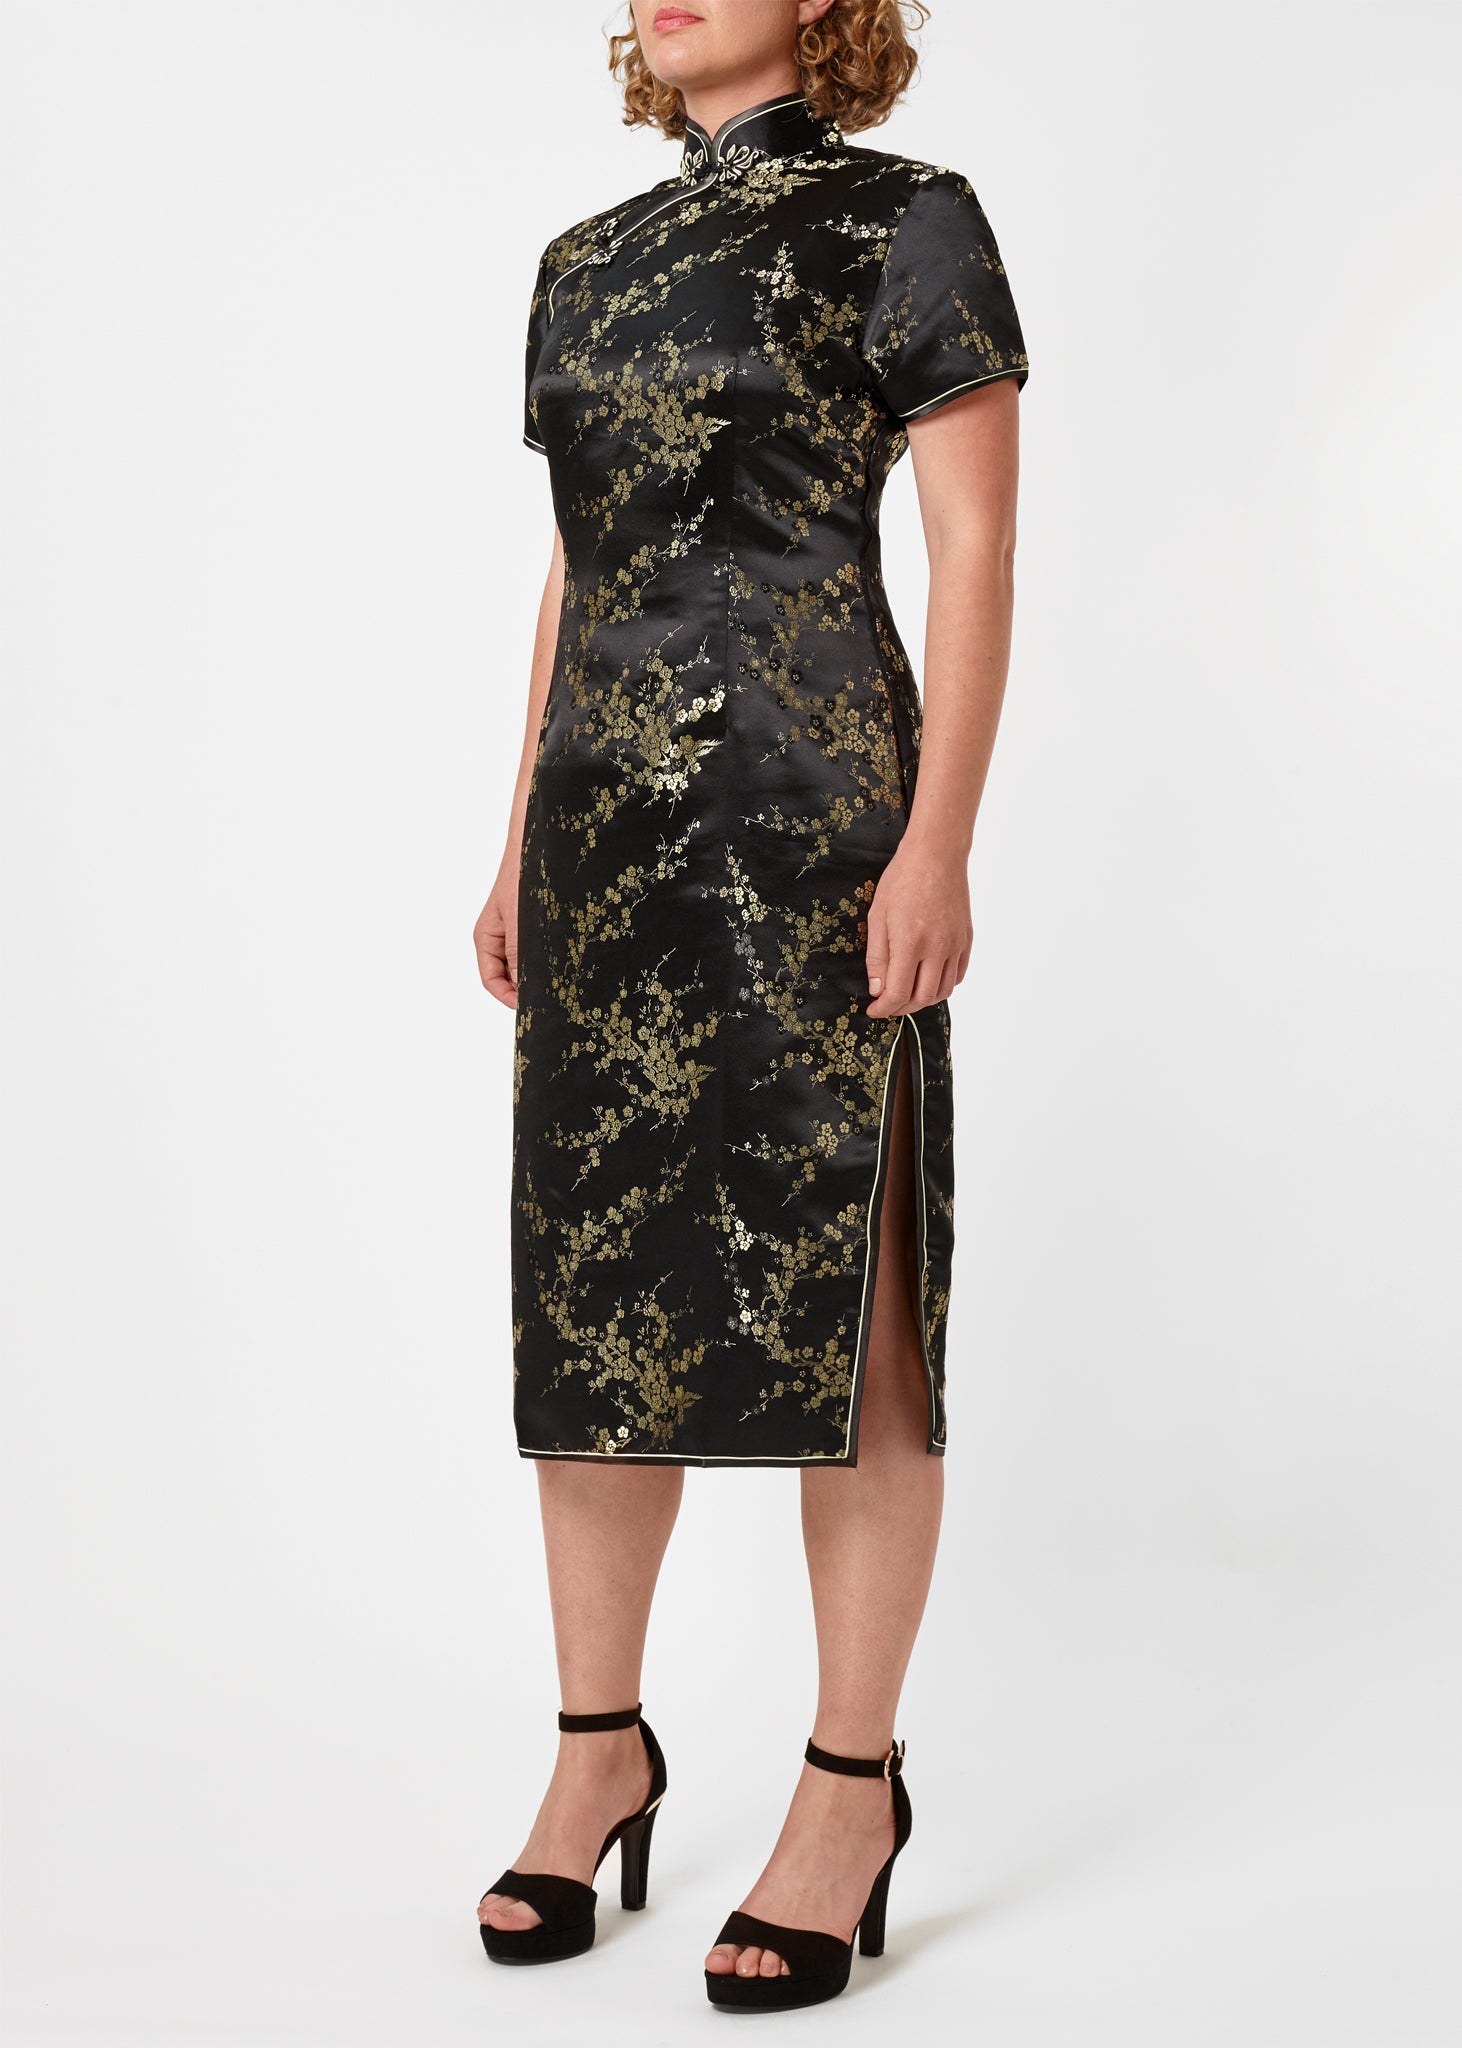 The Cheongsam or Qipao, is a feminine body-hugging dress with distinctive Chinese features of mandarin collar, side splits and hand stitched flower and knot frog fastenings. Manufactured in authentic high quality silk/rayon brocade in black with gold cherry blossom design - a symbol of female beauty and love.